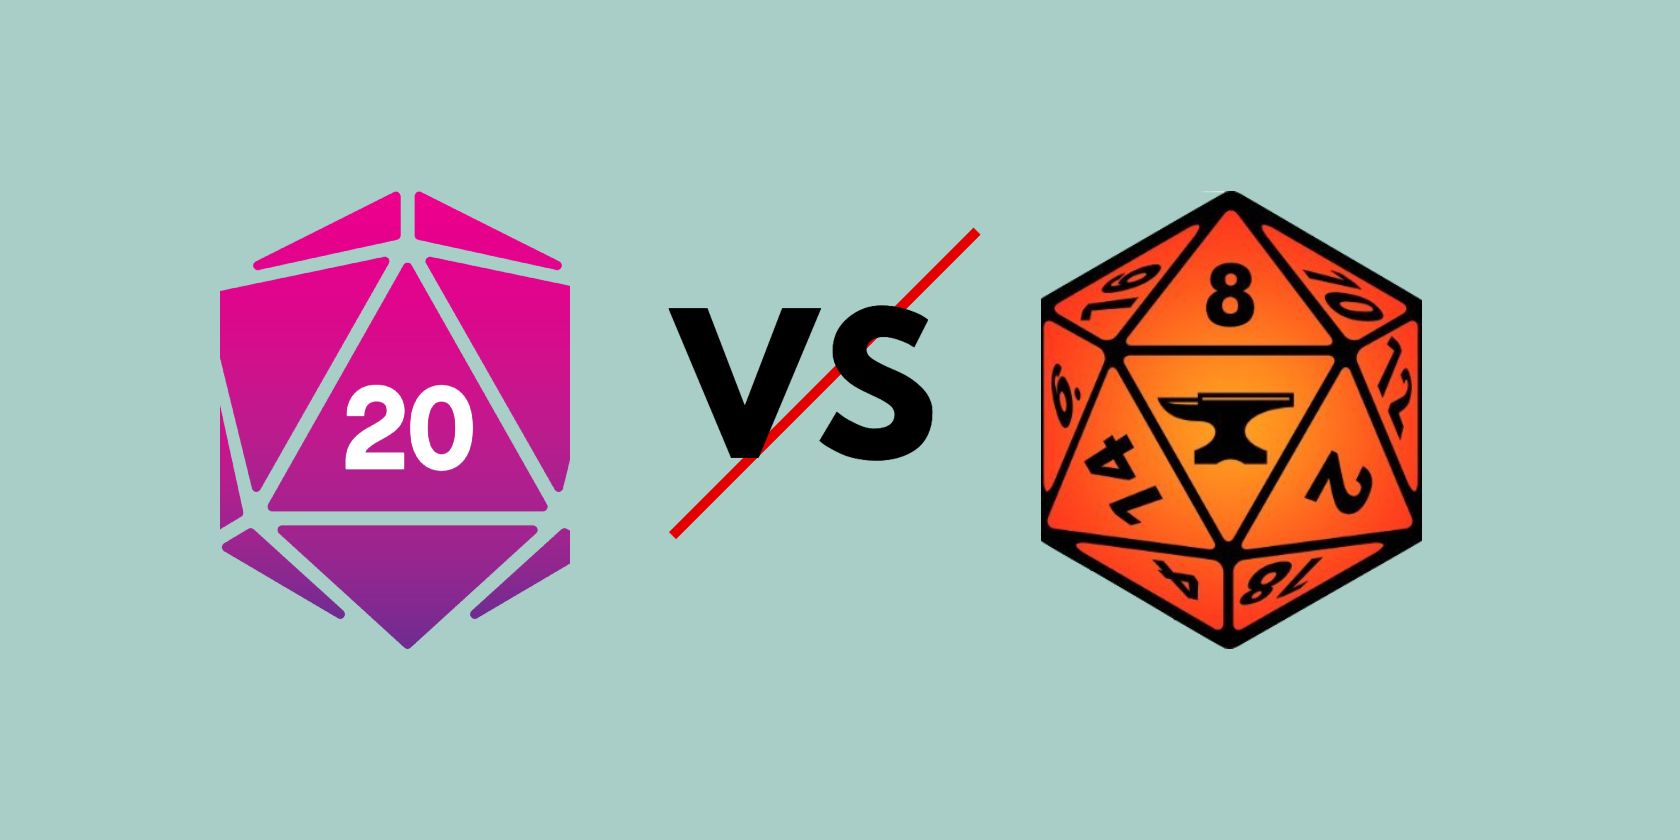 Roll20 vs FoundryVTT icons represented on a light teal background